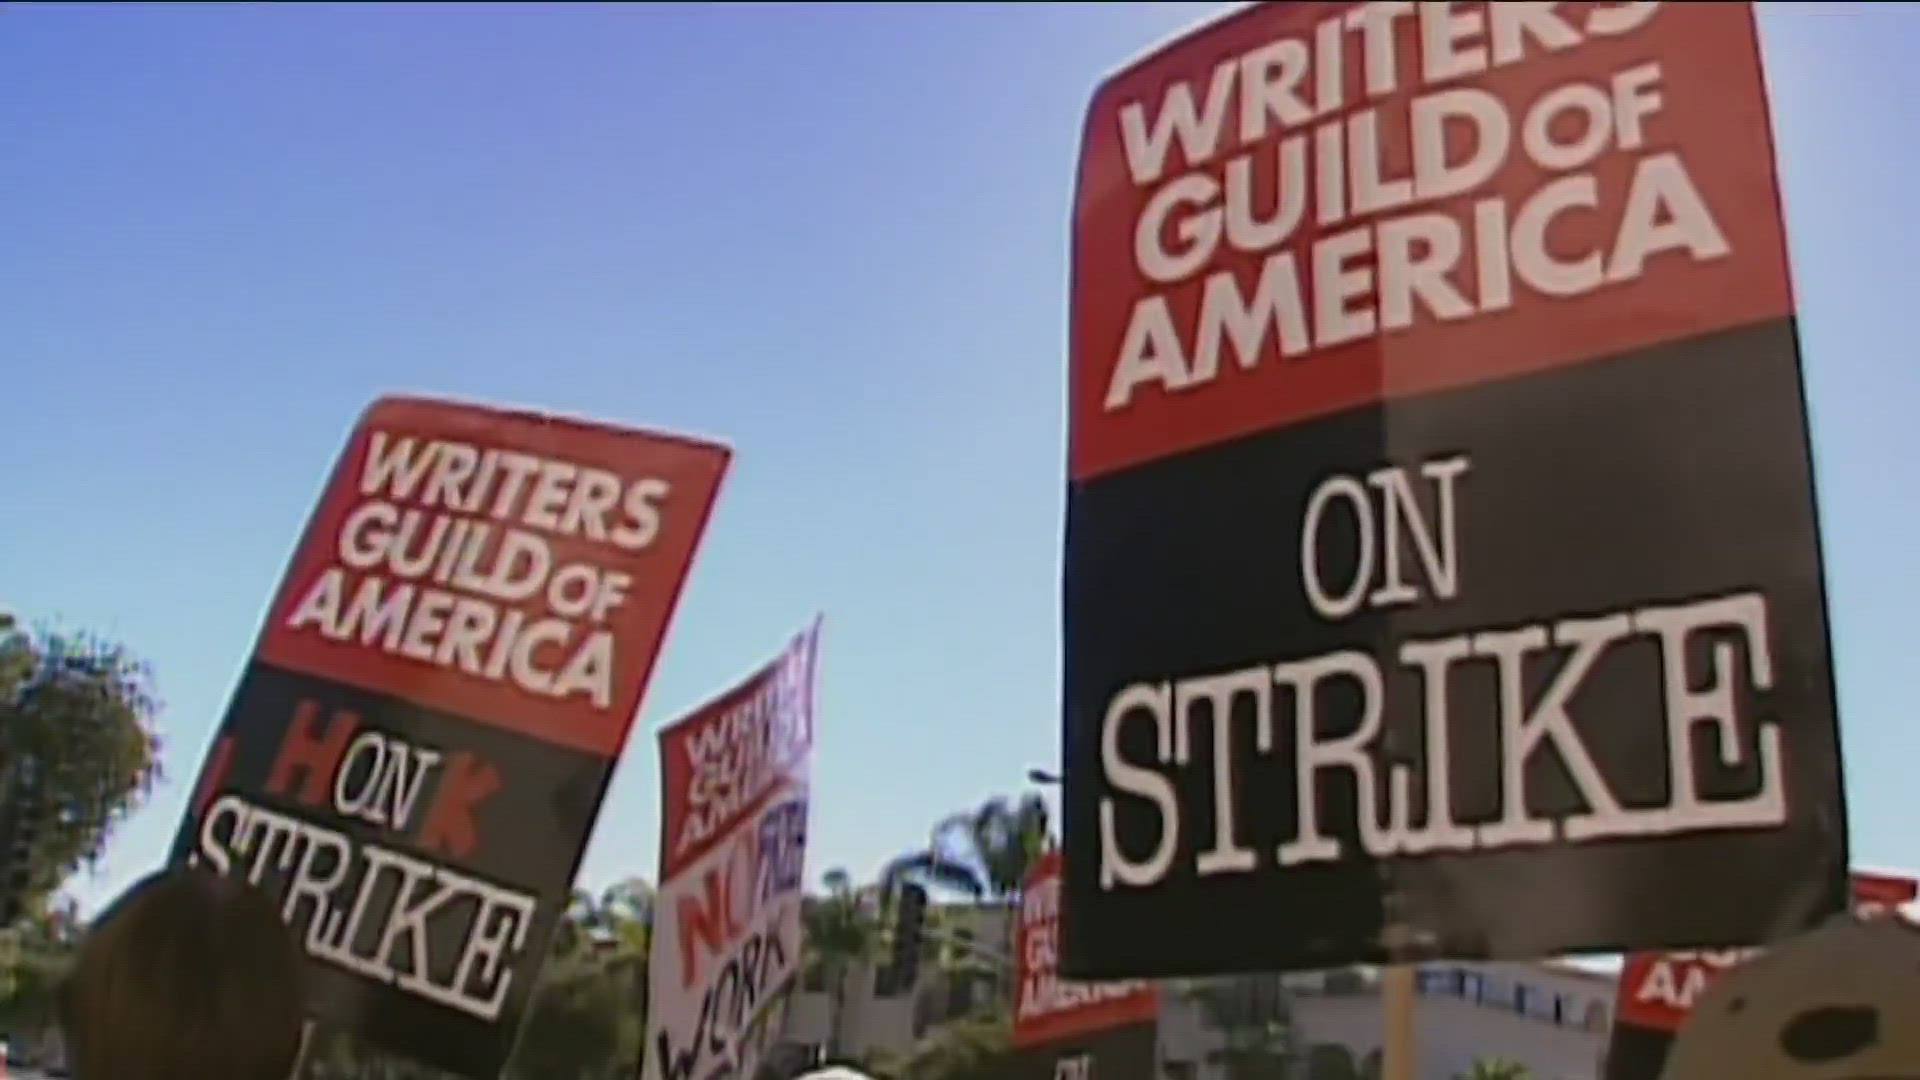 Here's what might happen if Hollywood writers go on strike.